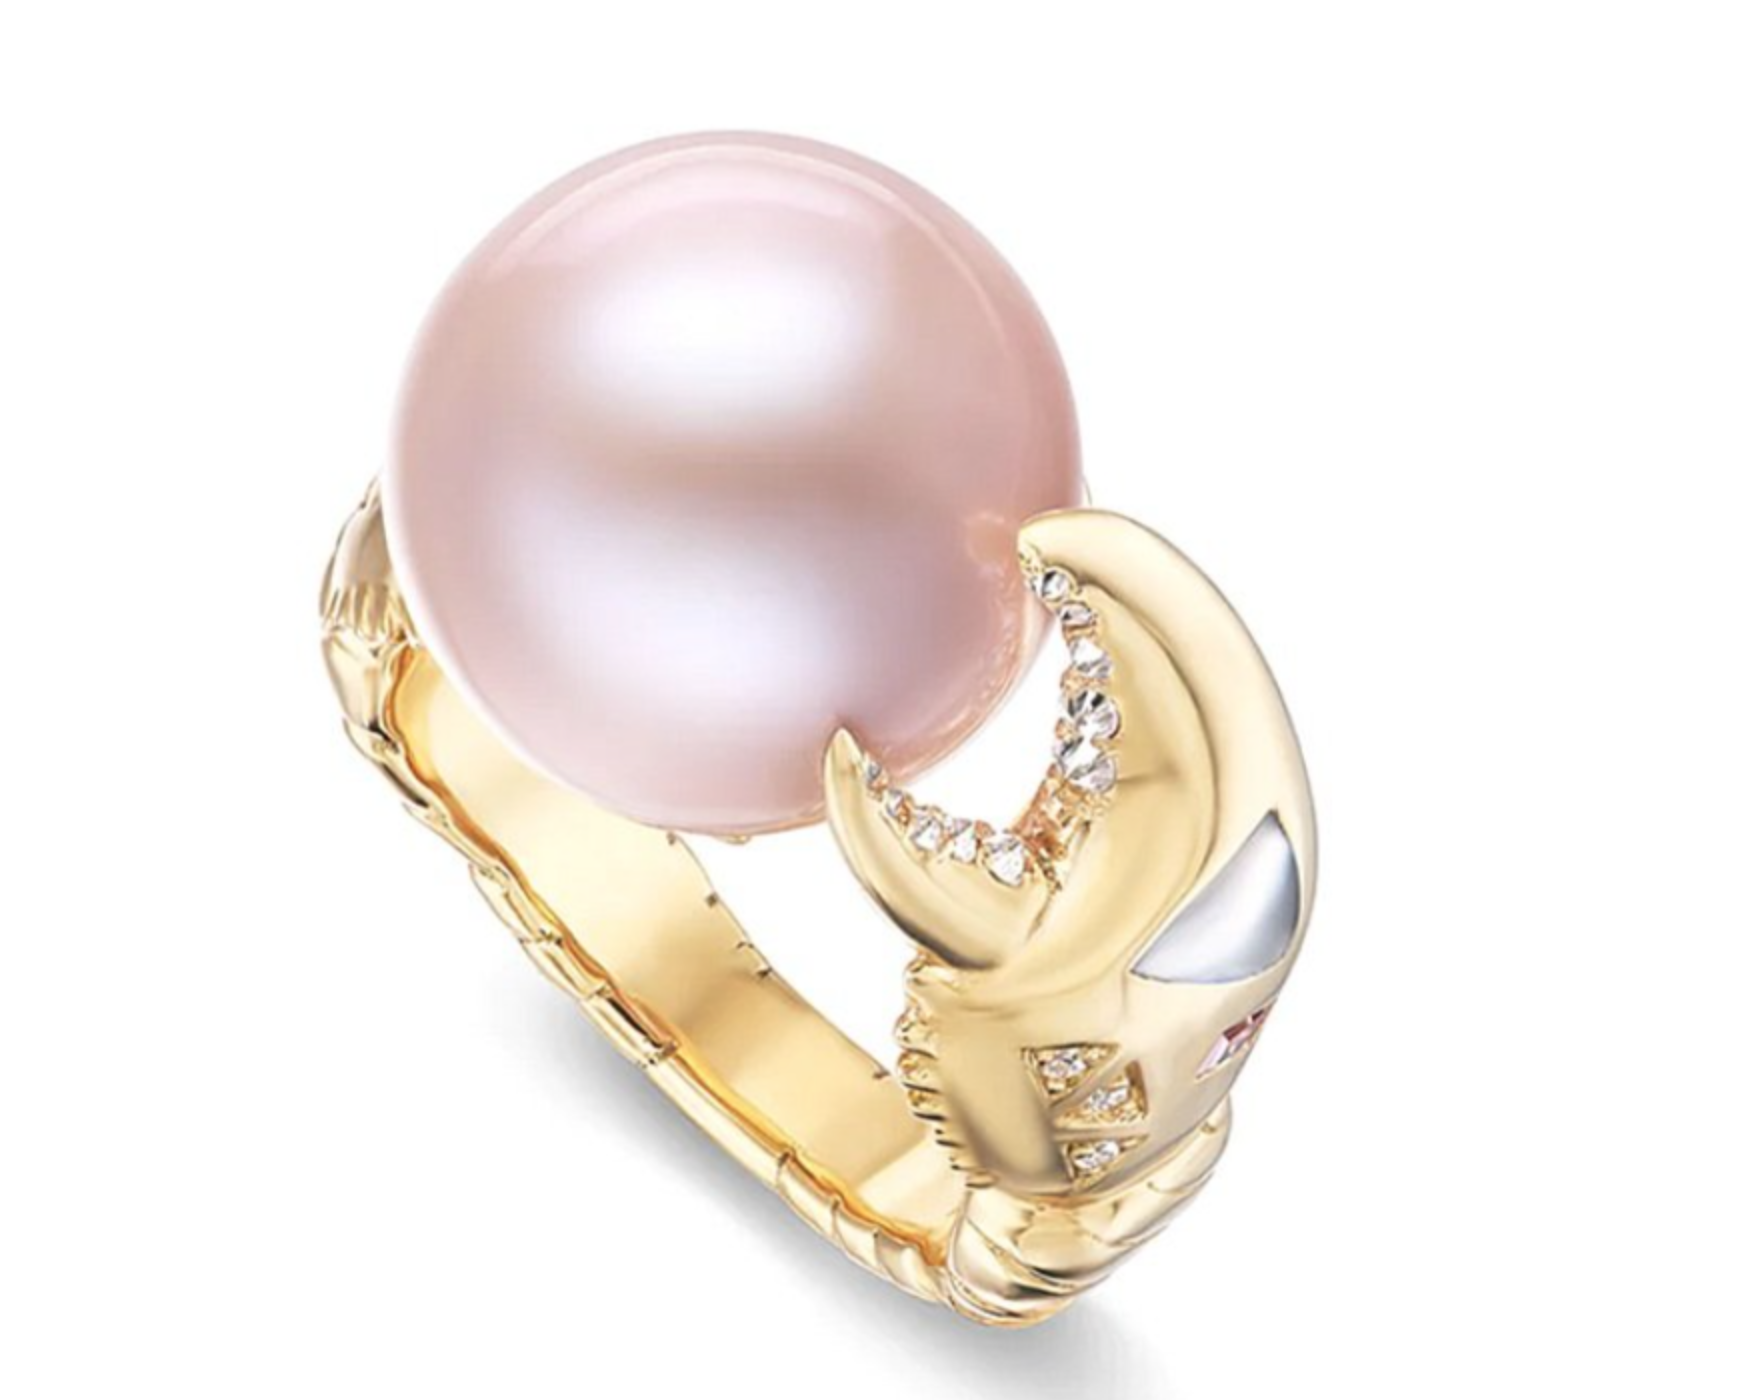 A Gold Ring Rests On A White Cloth With Pink Pearls Background Wallpaper  Image For Free Download - Pngtree